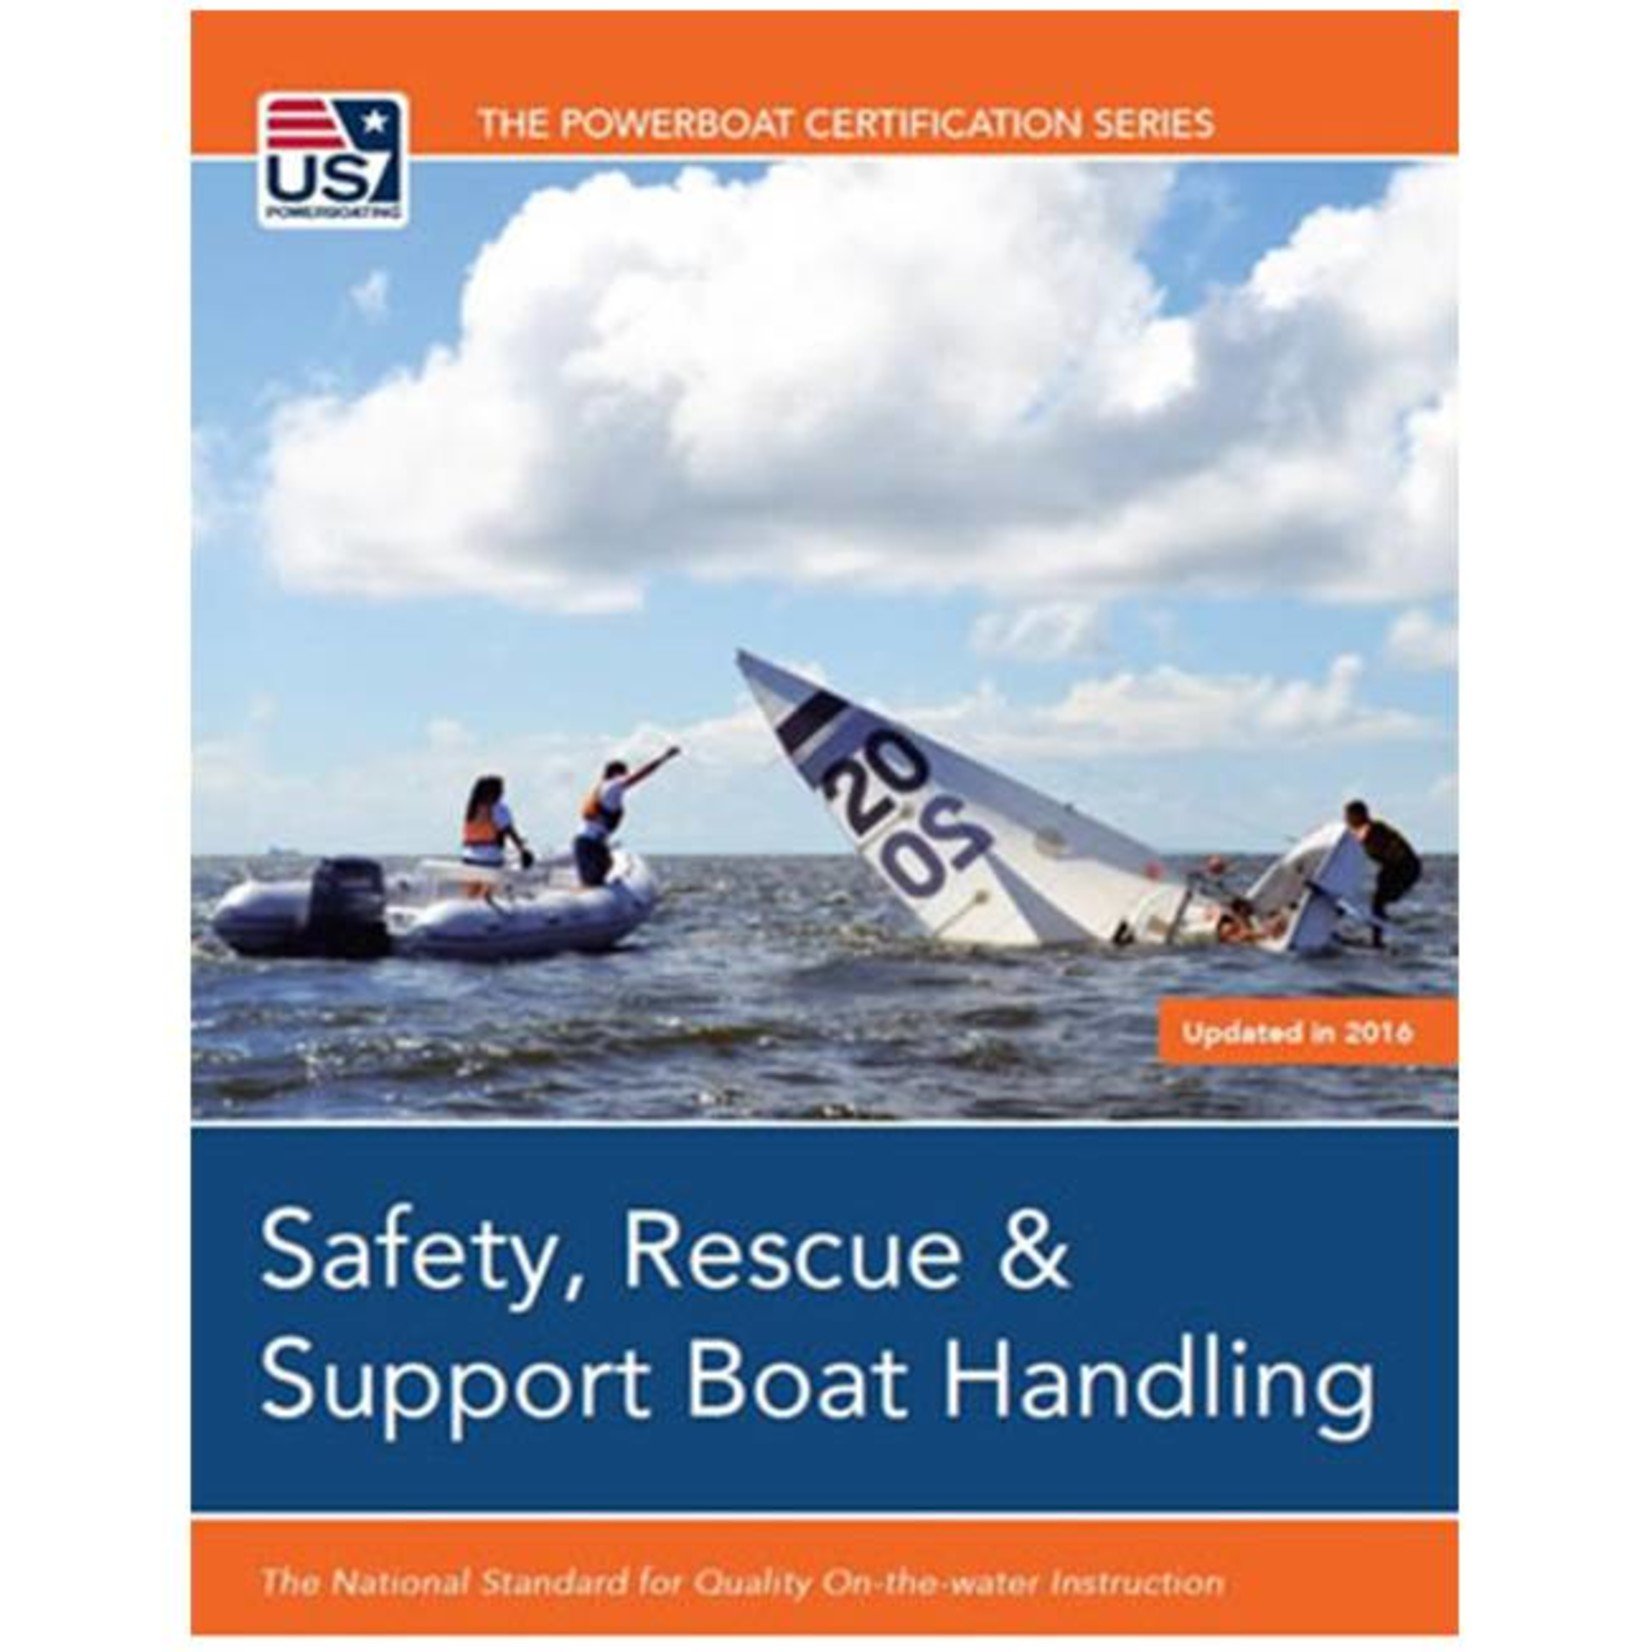 TEXT Safety, Rescue & Support Boat Handling